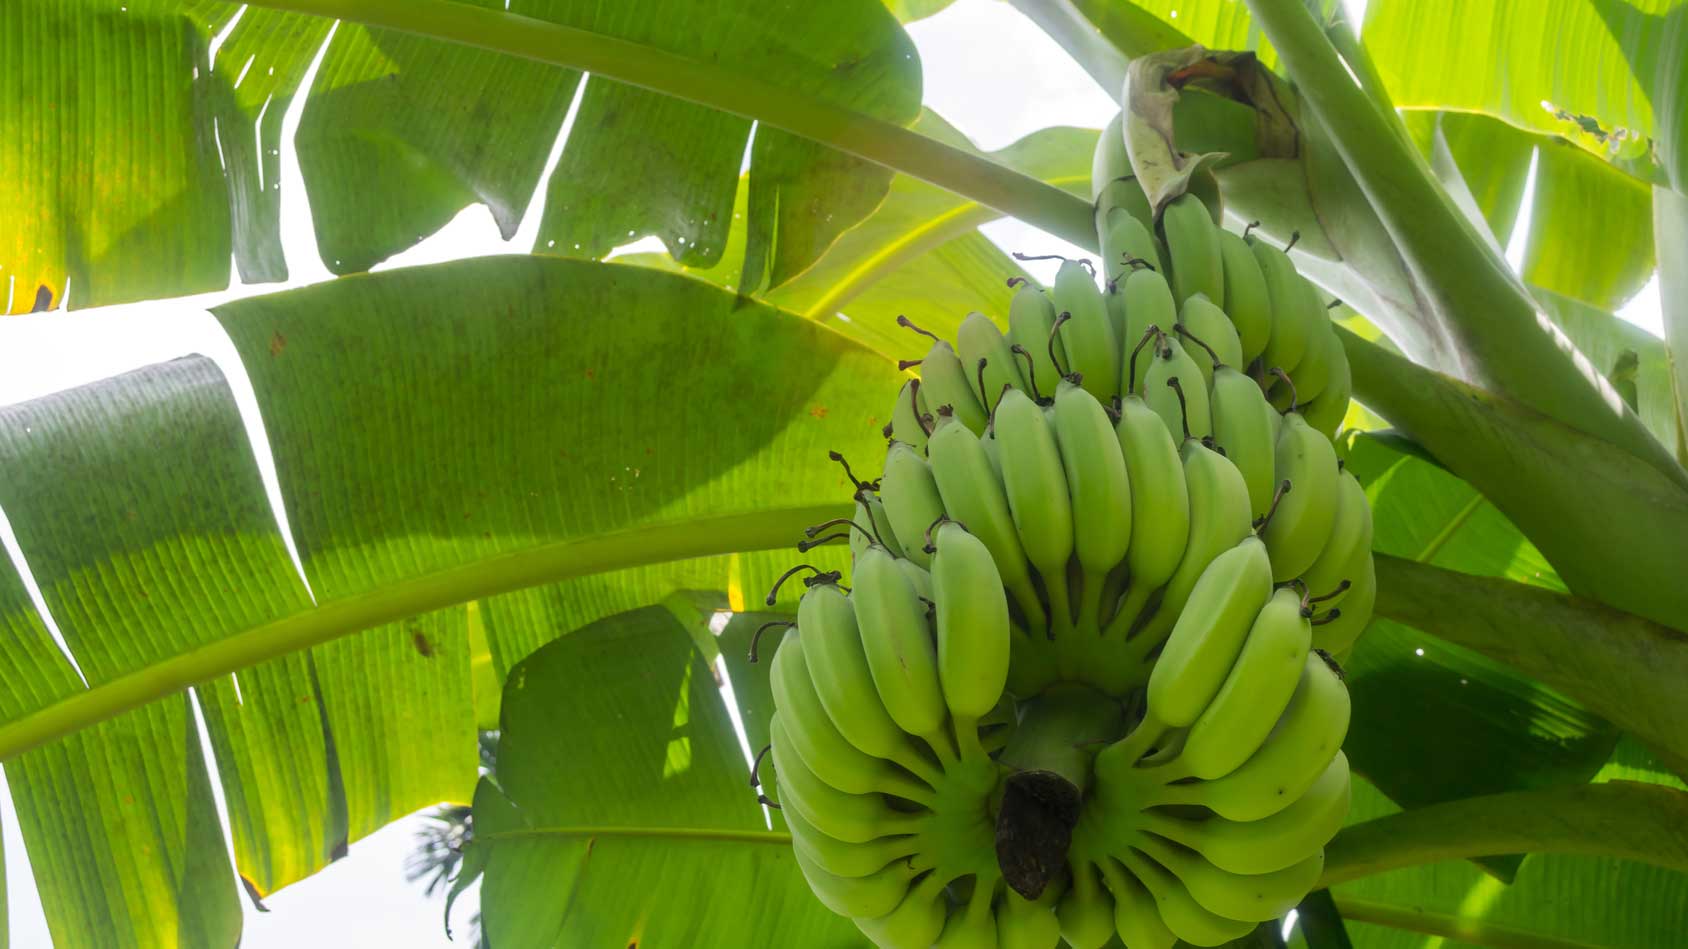 Bananas as We Know Them May Be Disappearing